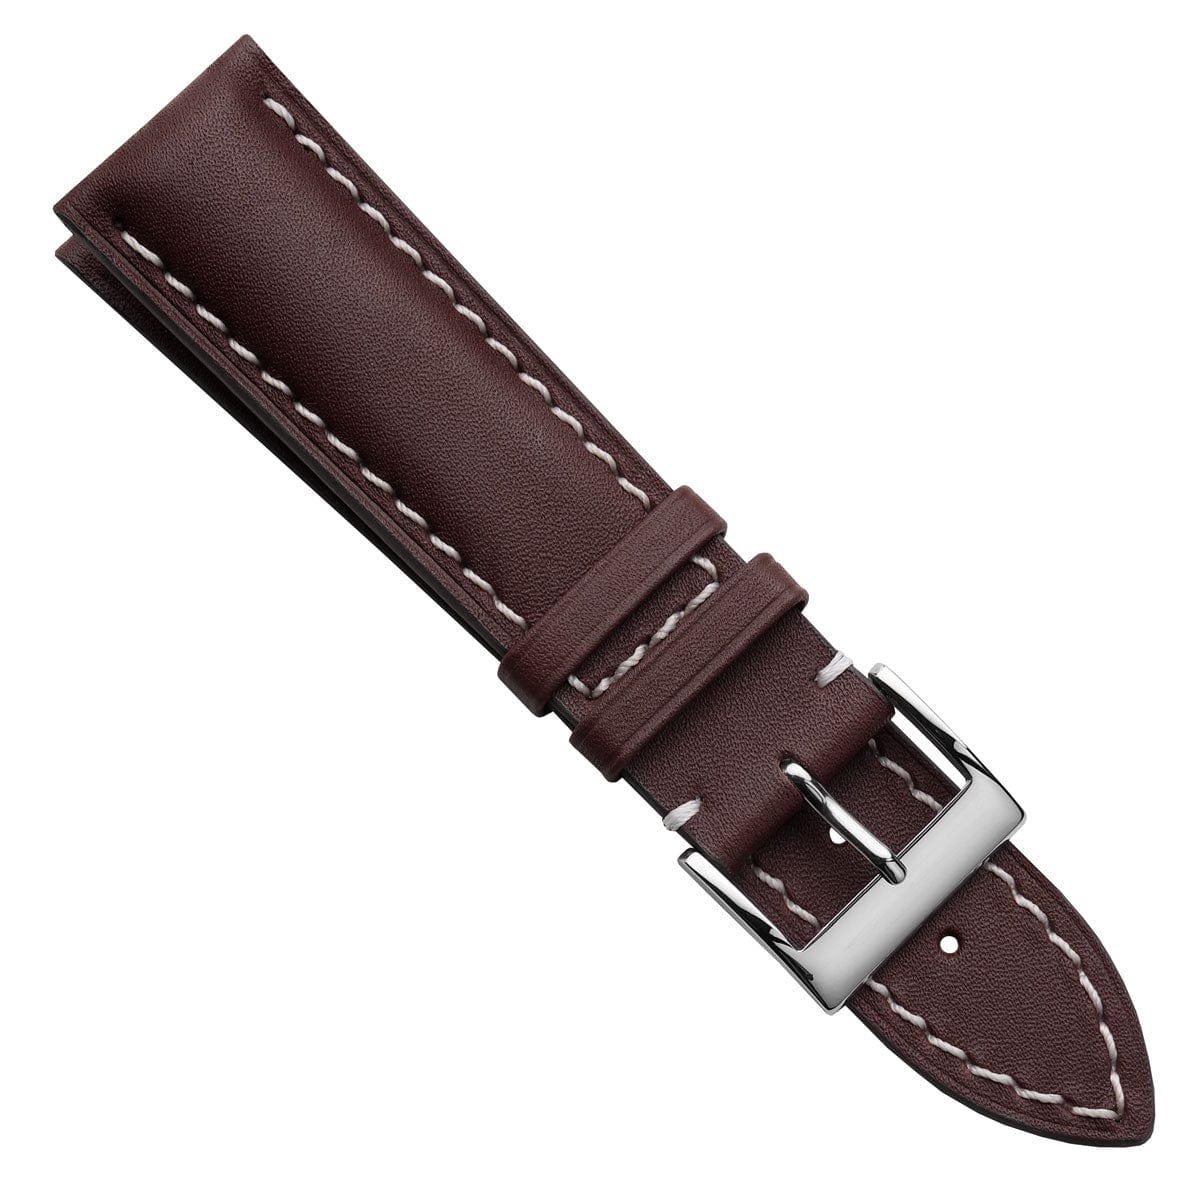 Ostend Thick Padded Leather Watch Strap - Baranil Chestnut